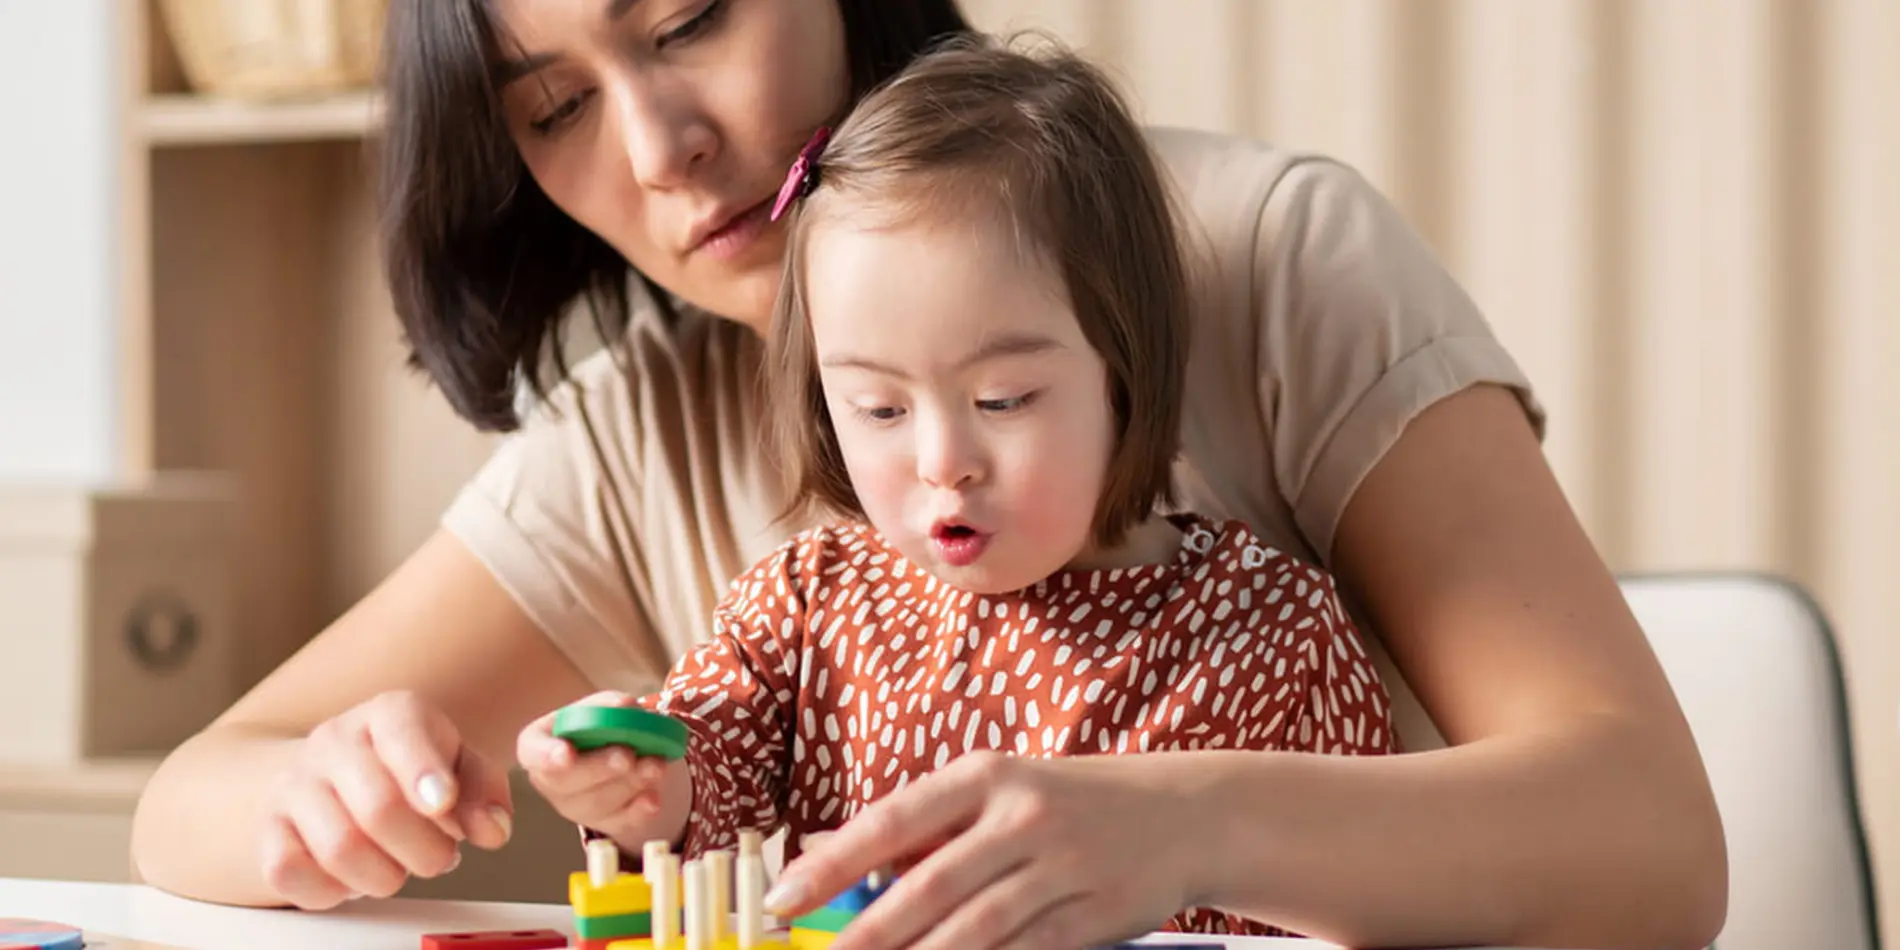 Applied behavior analysis professional with child assessing